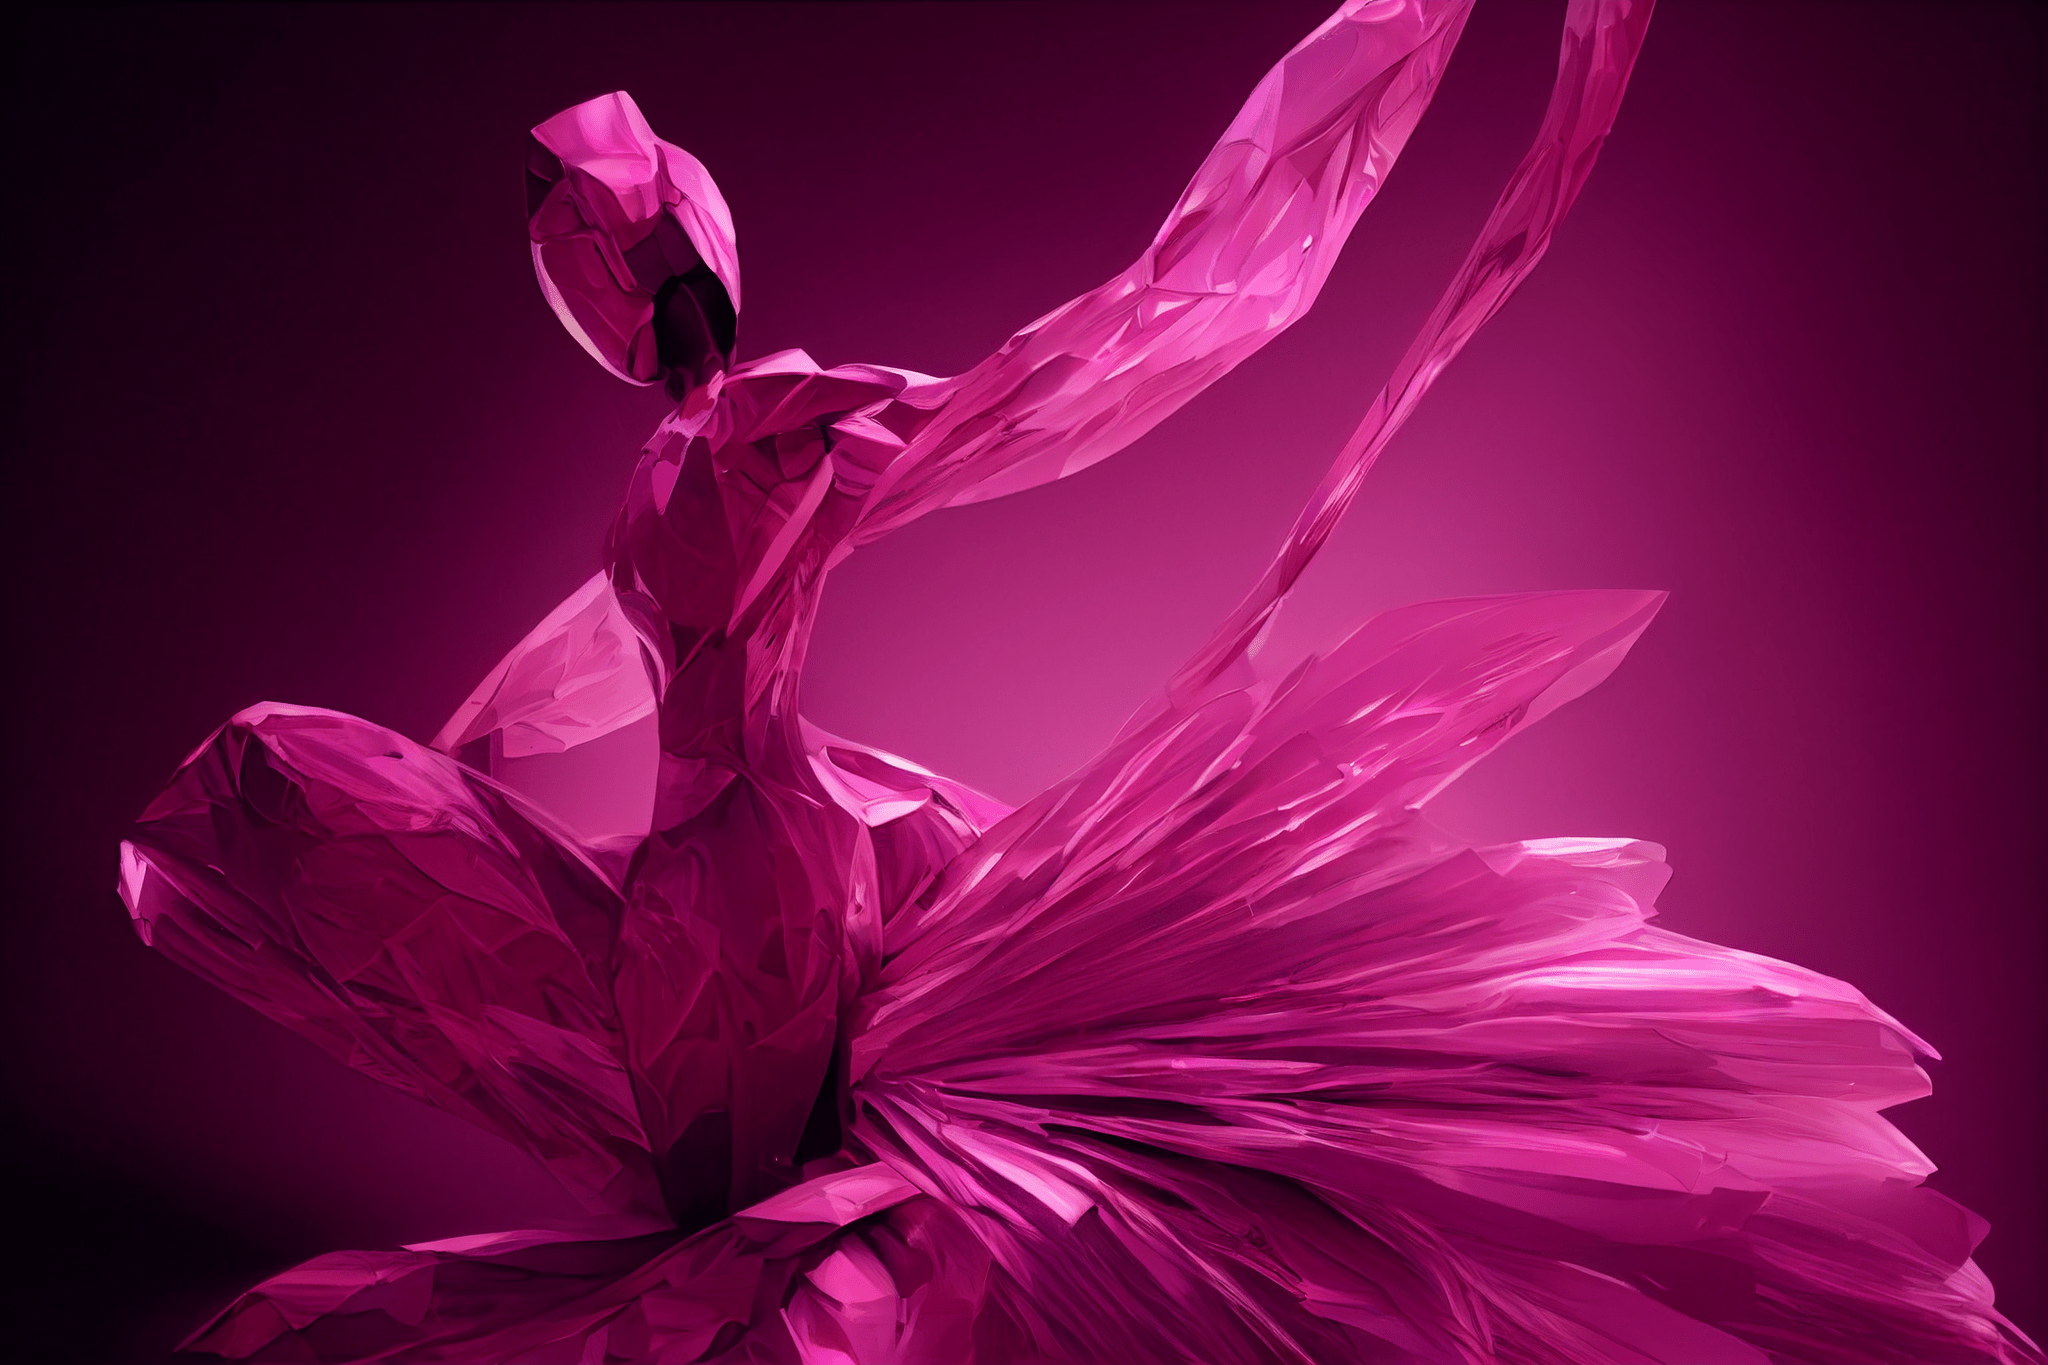 A pink ballerina in a pink dress with a pink background - Magenta